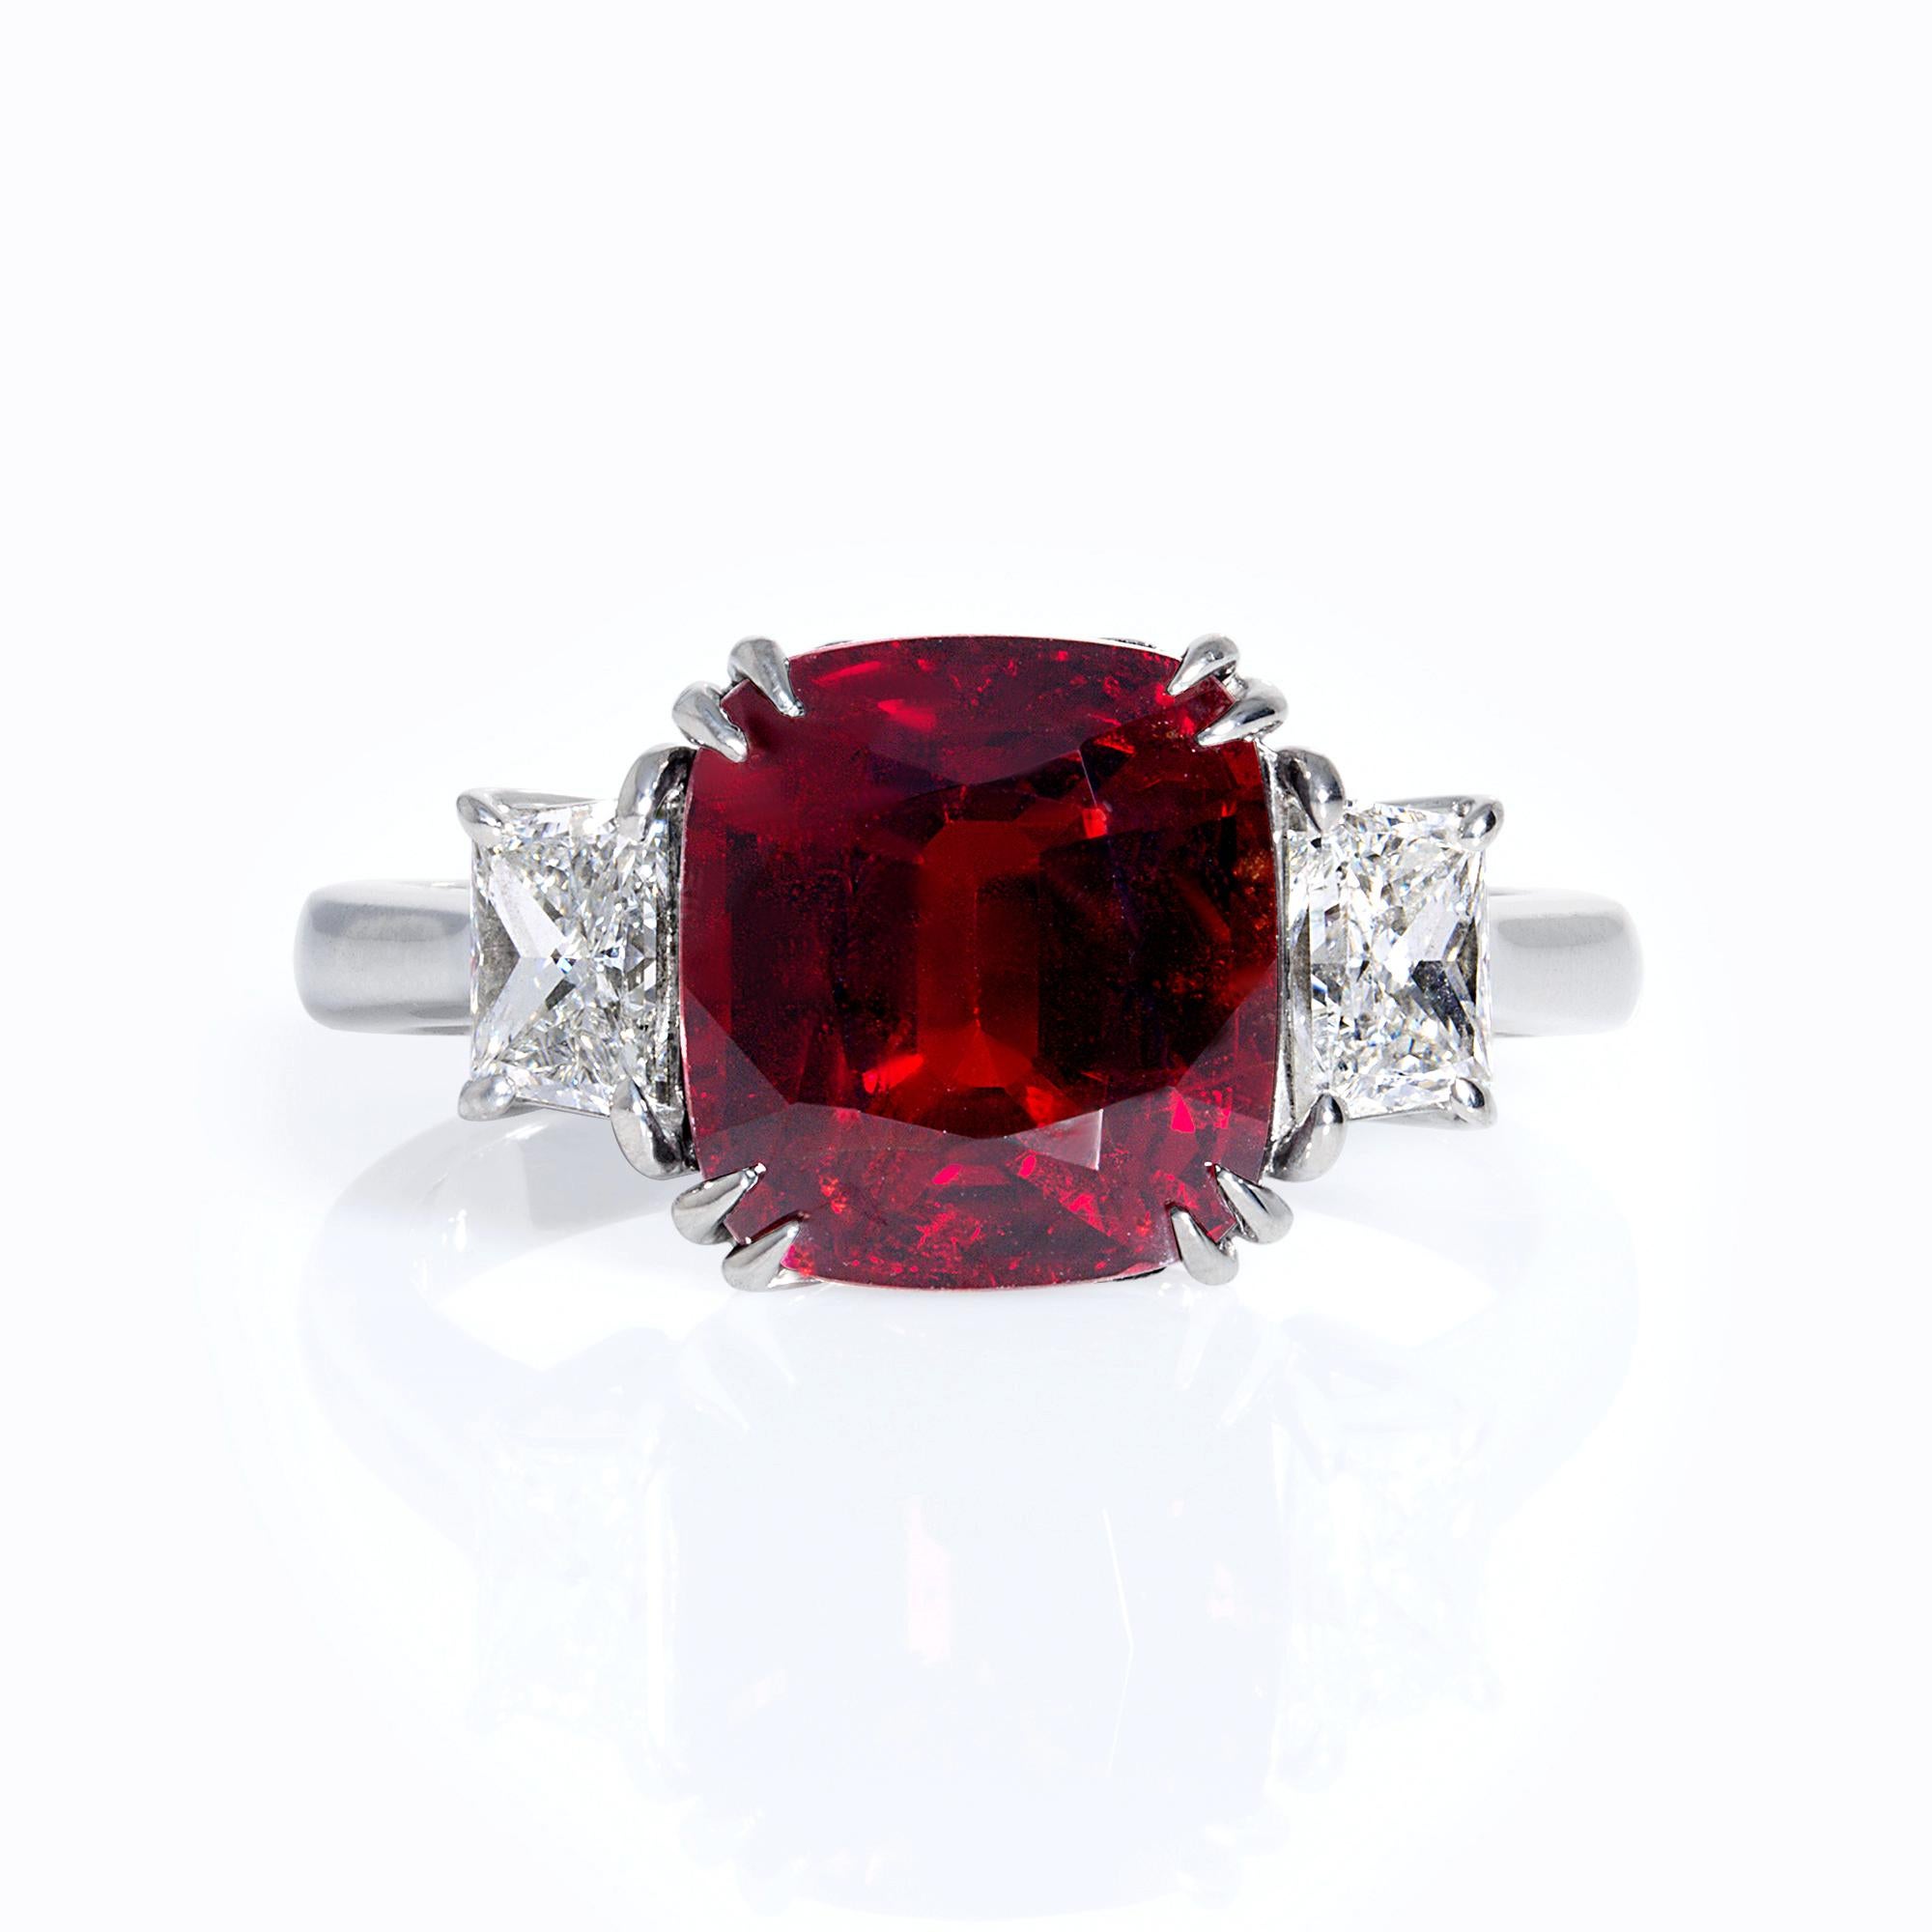 Natural BURMA 5.50ct No-Heat Vivid Red SPINEL and Diamond Vintage Platinum 3 Stone Ring, AGL.

Red SPINEL, the gem of the many royals - a Very Sparkly Alternative for the Modern Engagement ring. If you are one of the many people interested in